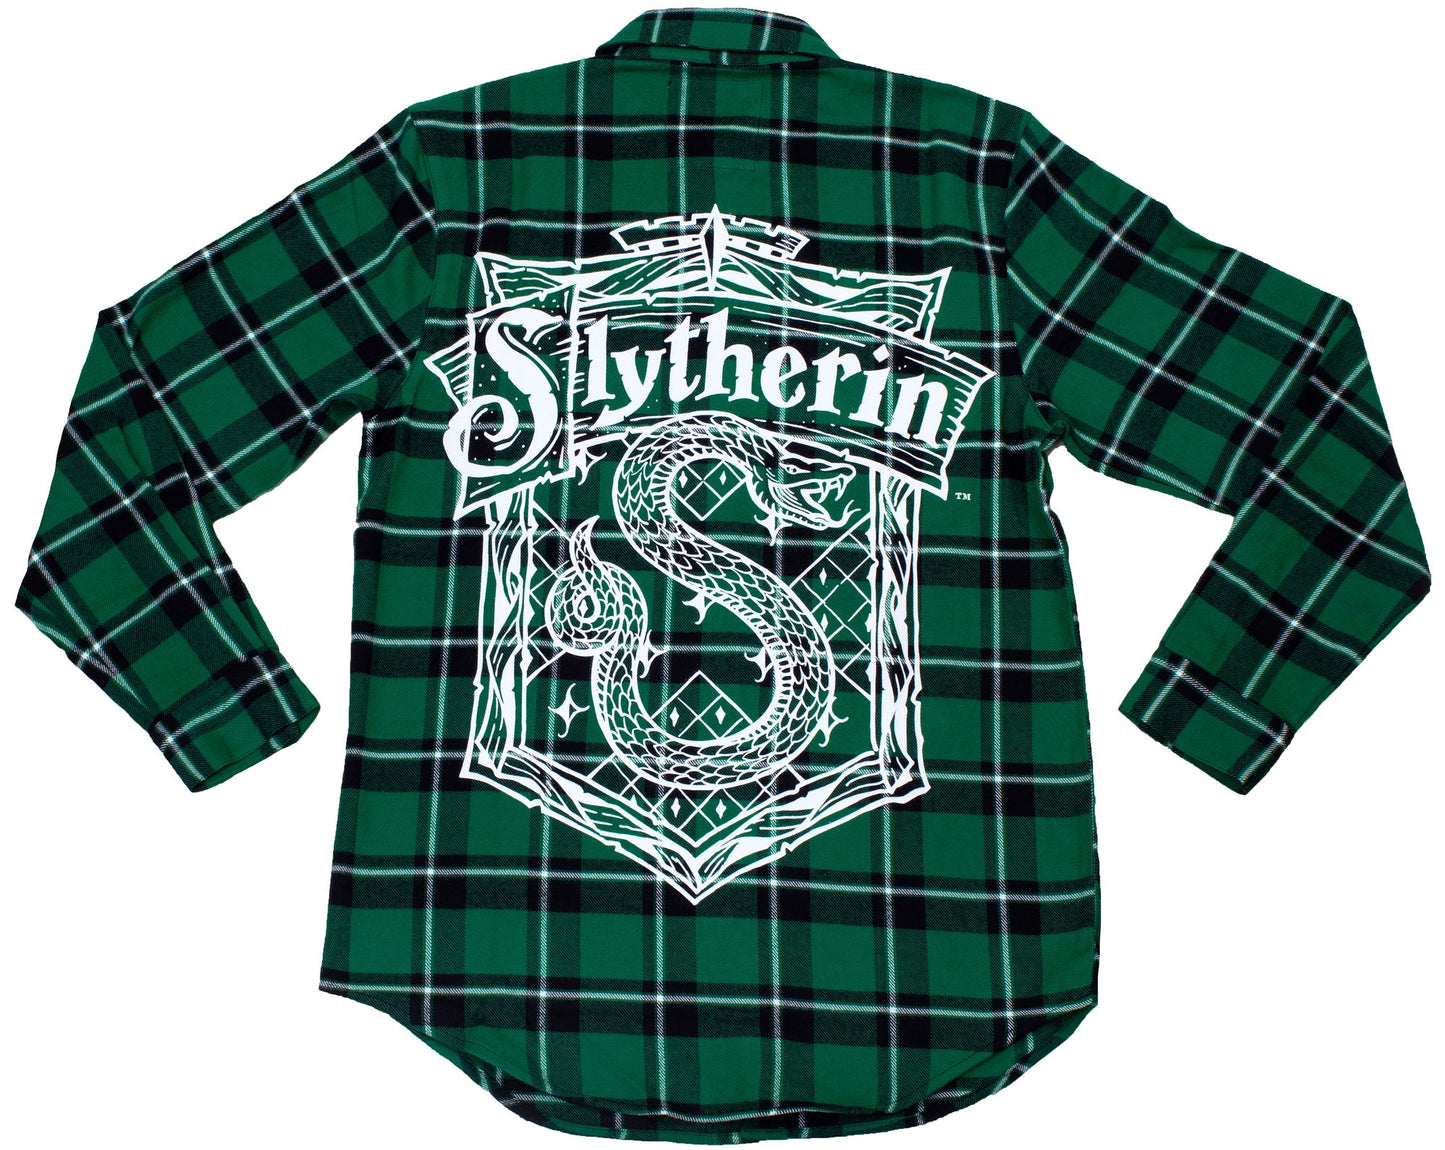 Slytherin House Crest (Harry Potter) Flannel Shirt by Cakeworthy